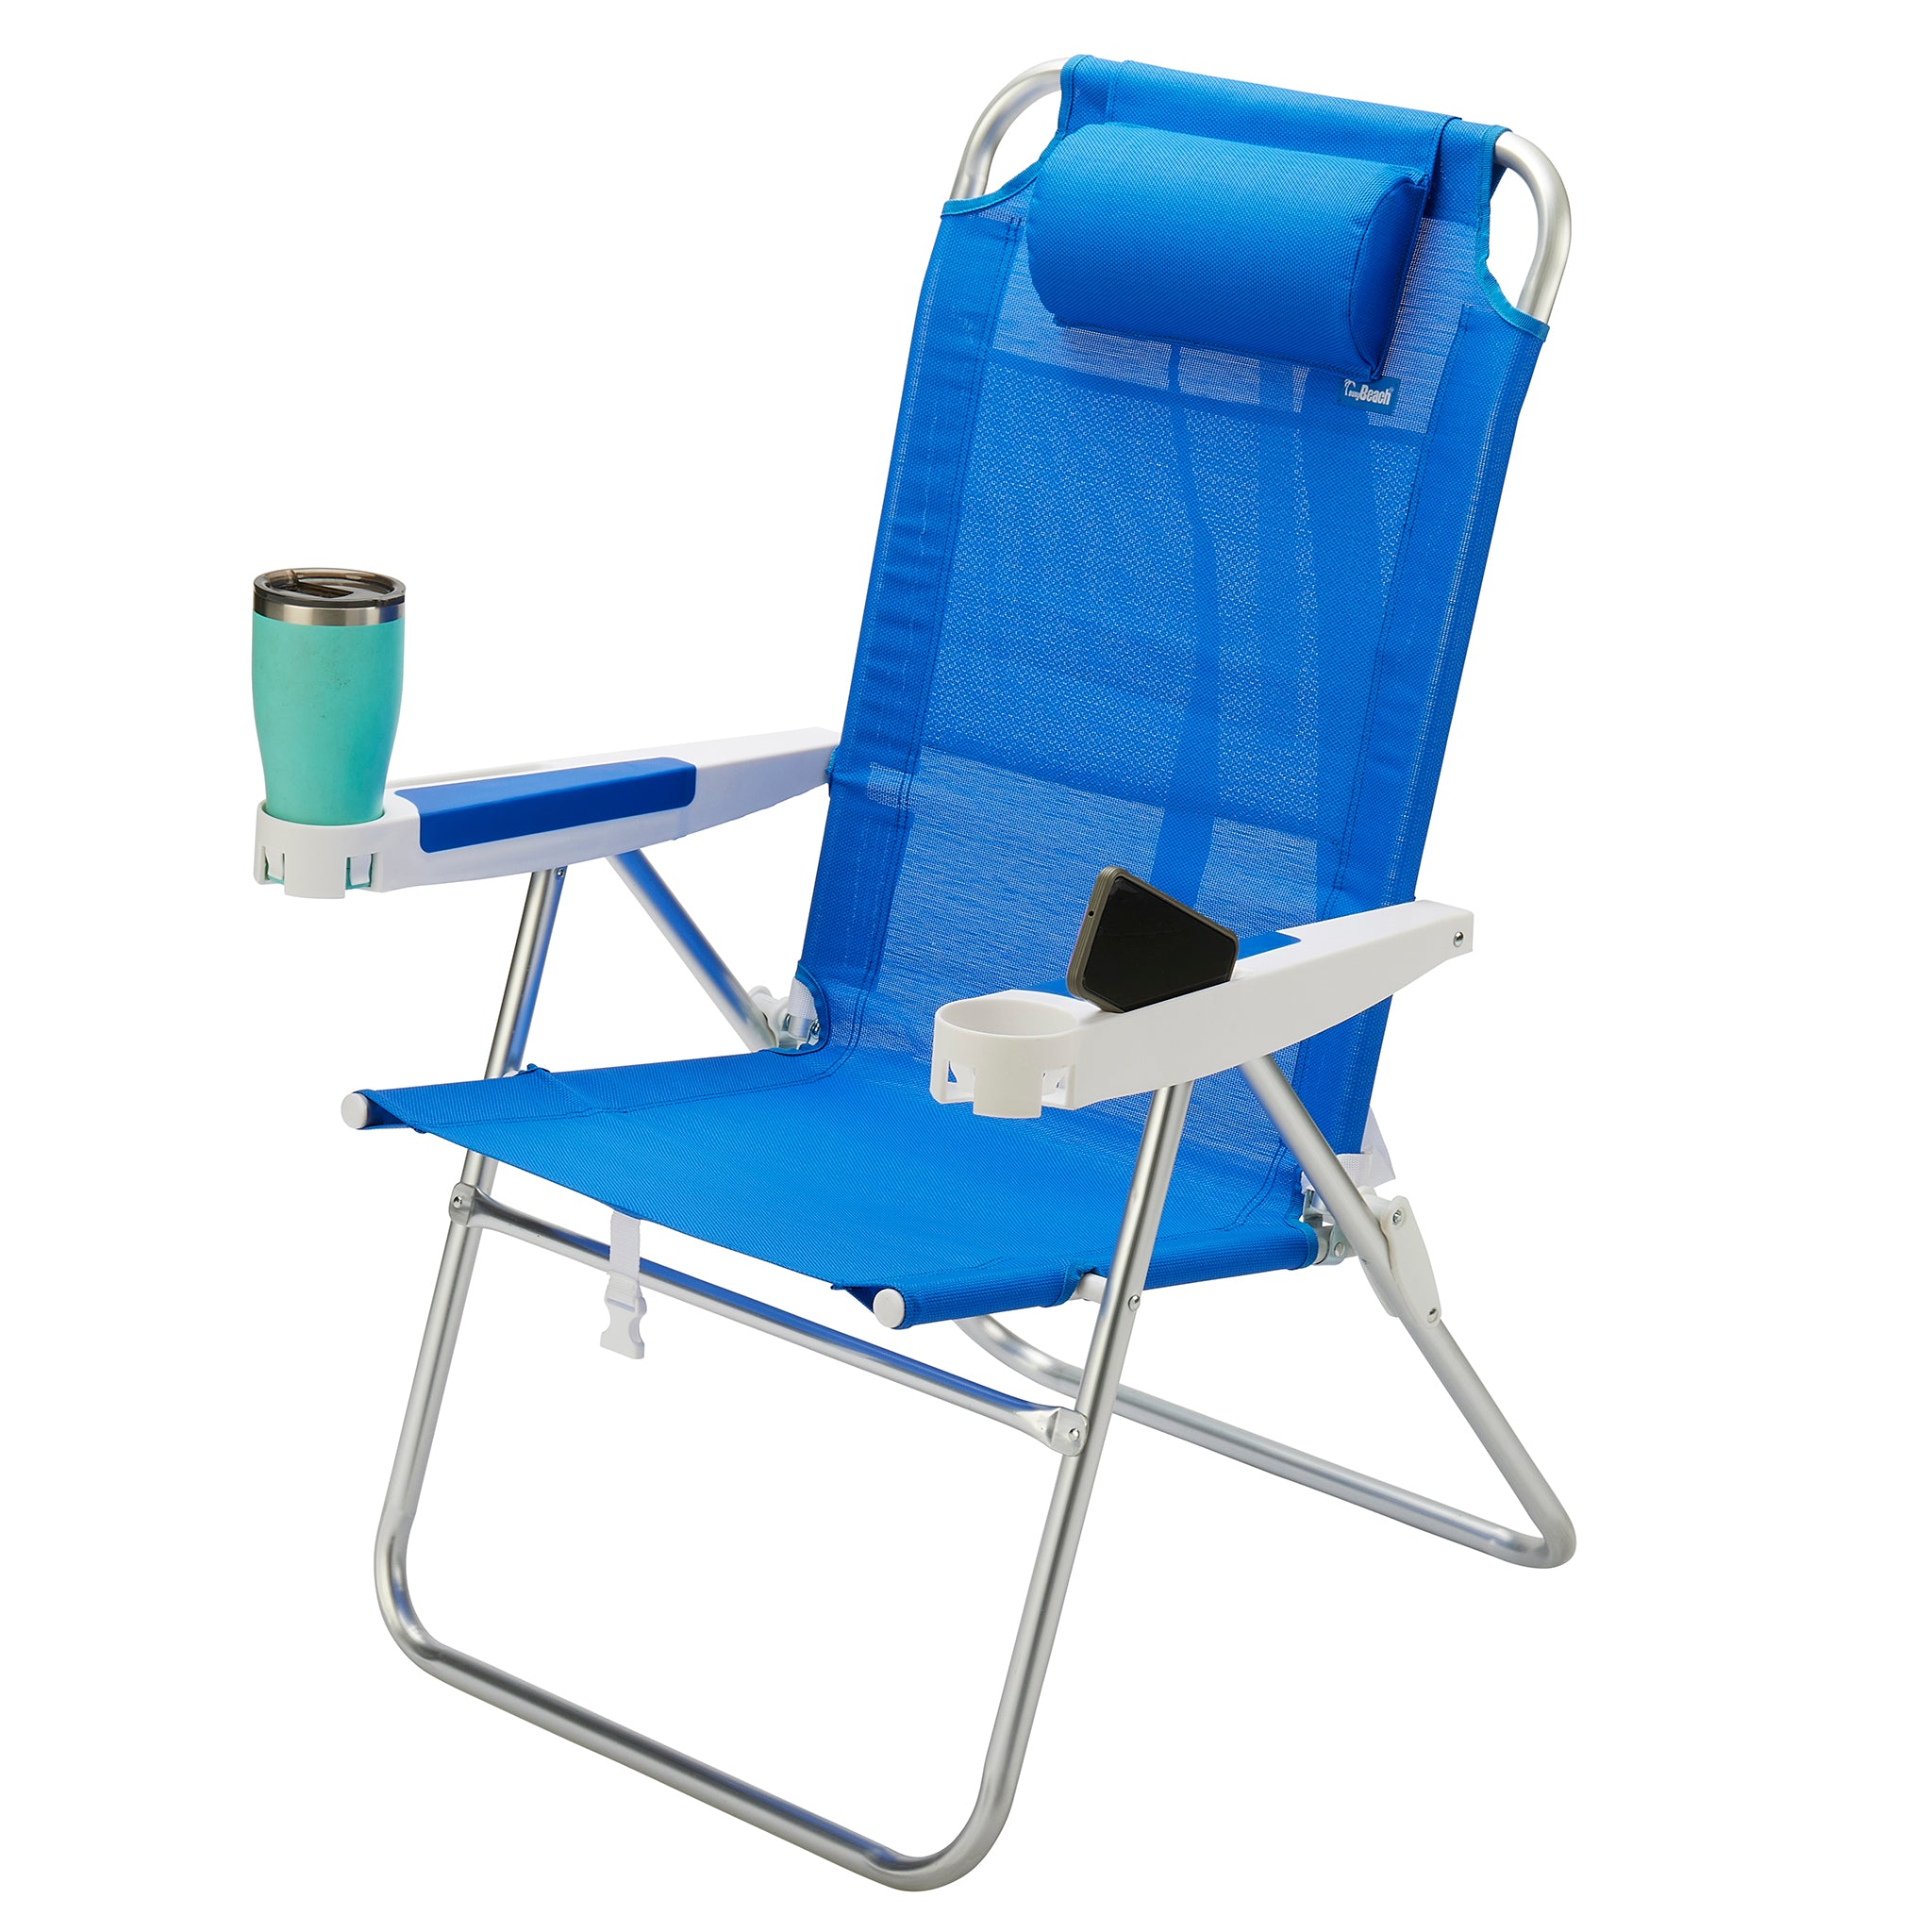 Set of Two (2) Tall Backpack Beach Chairs